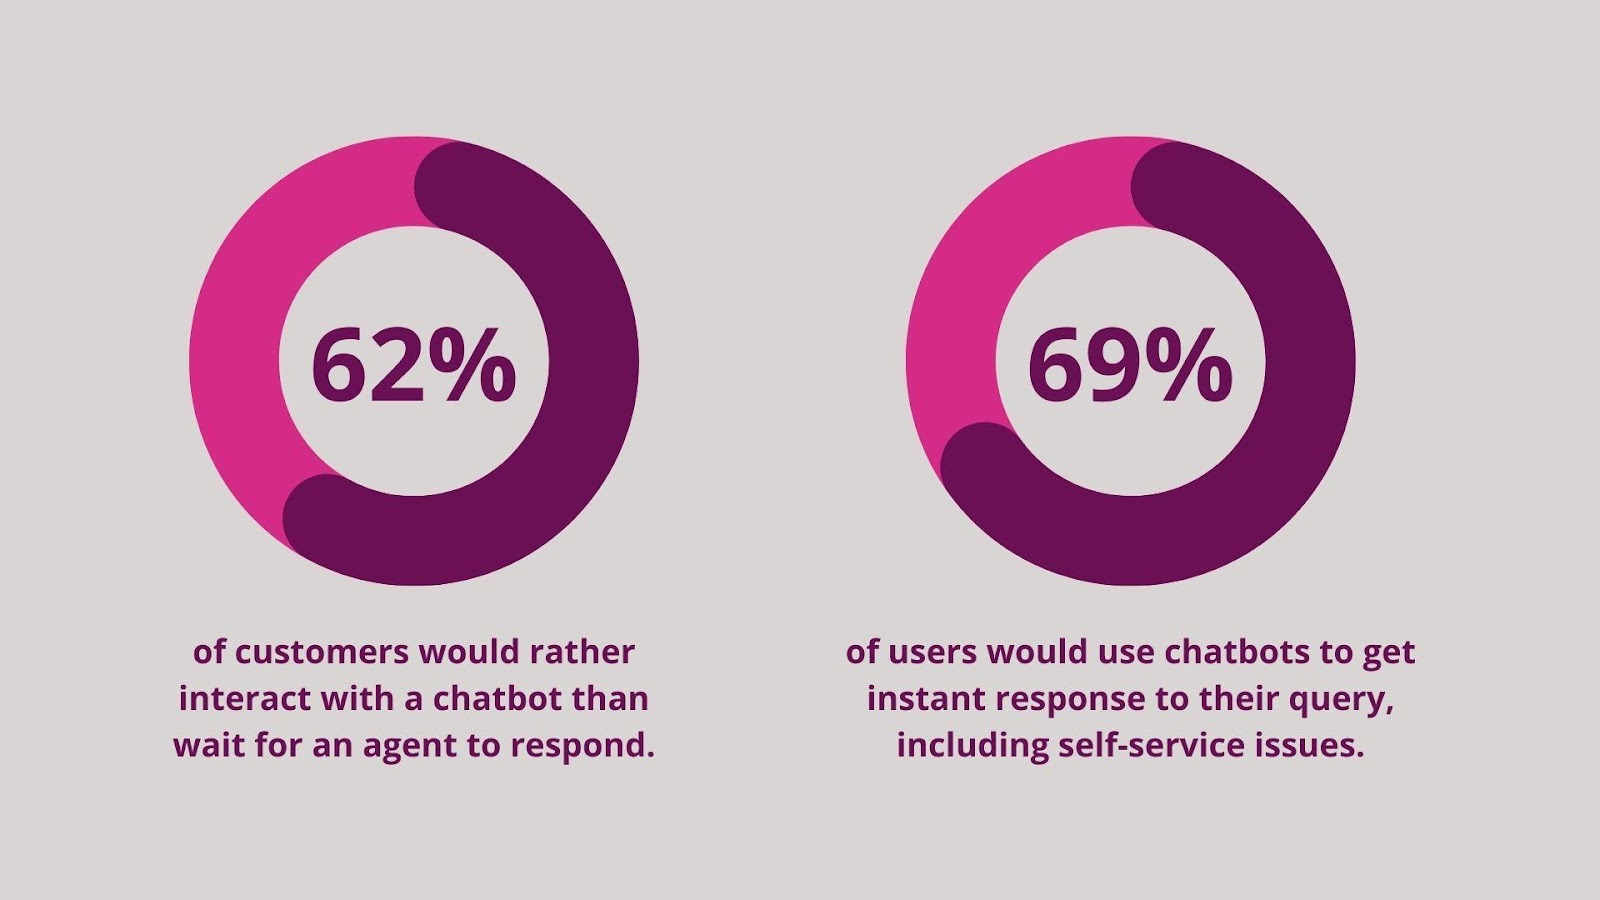 Chatbot statistics claiming 62% of customers would rather interact with a chatbot than wait for an agent to respond and 69% of users would use chatbots to get instant response to their query, including self-service issues.